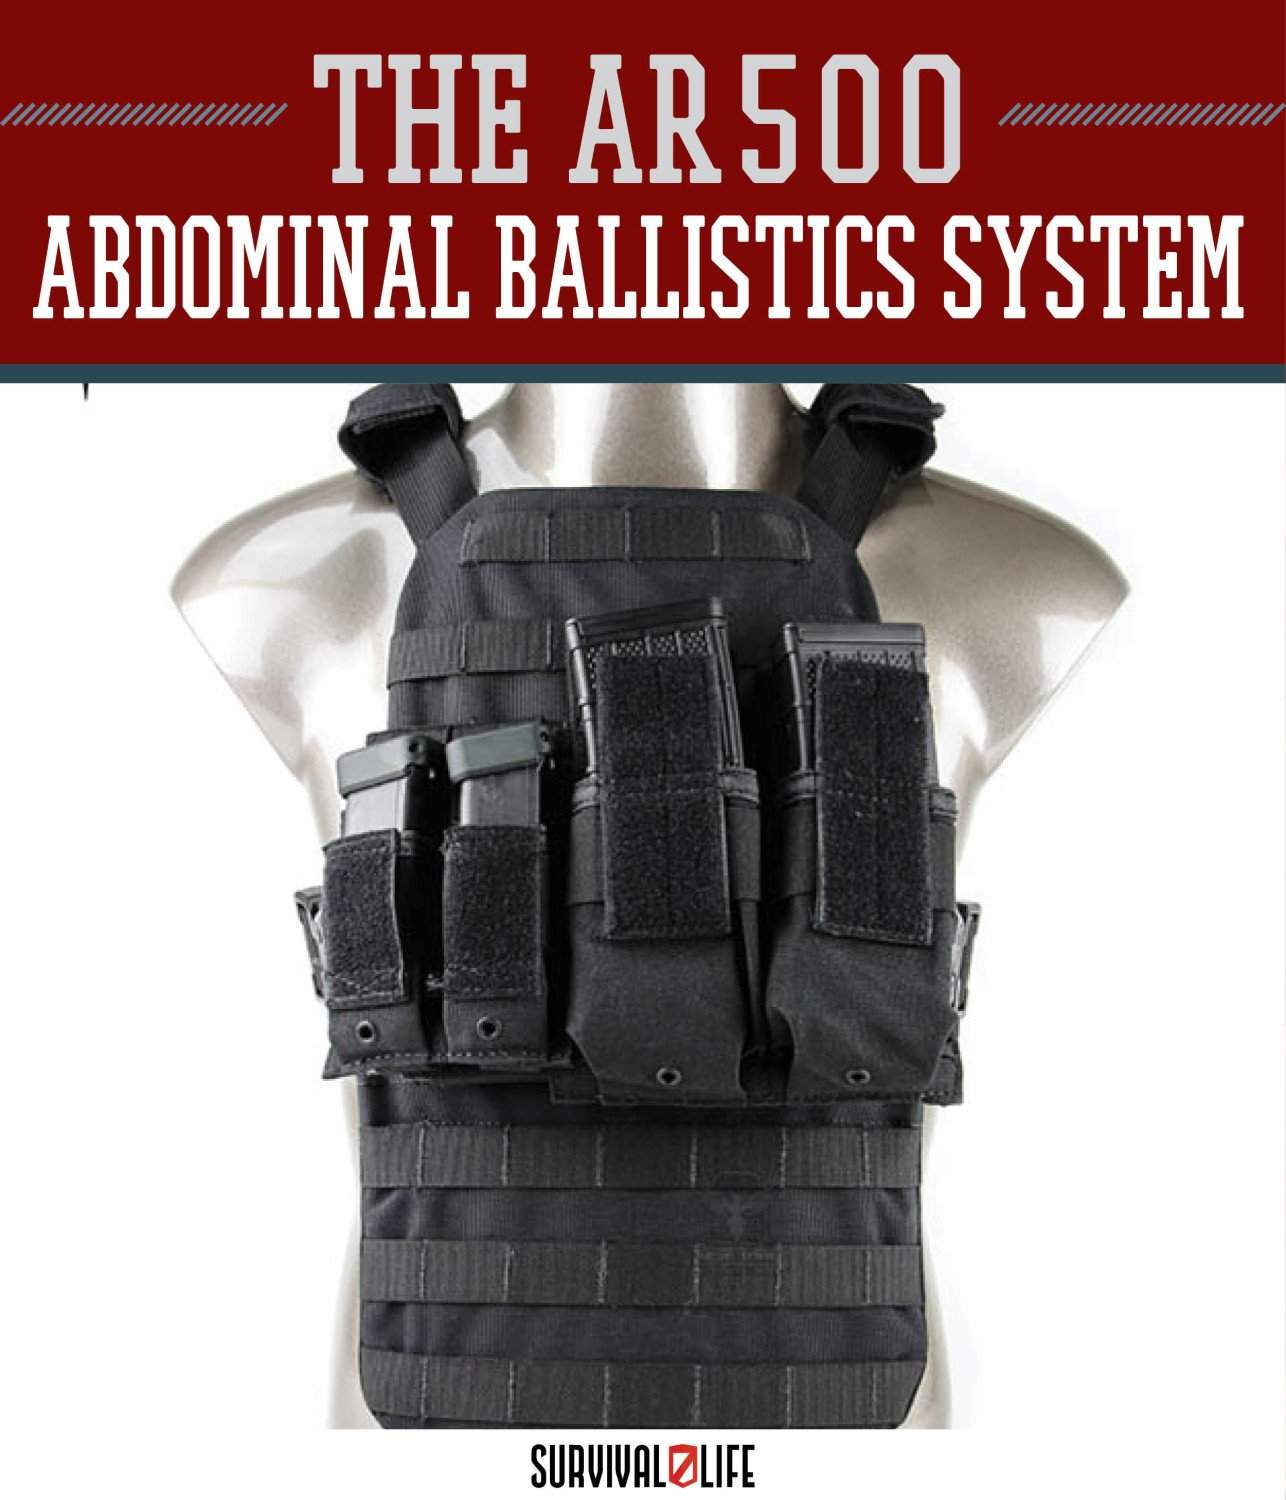 Product Review: The Abdominal Ballistics System (ABS) by AR500 Armor by Survival Life at http://survivallife.staging.wpengine.com/2015/05/19/abdominal-ballistics-system/